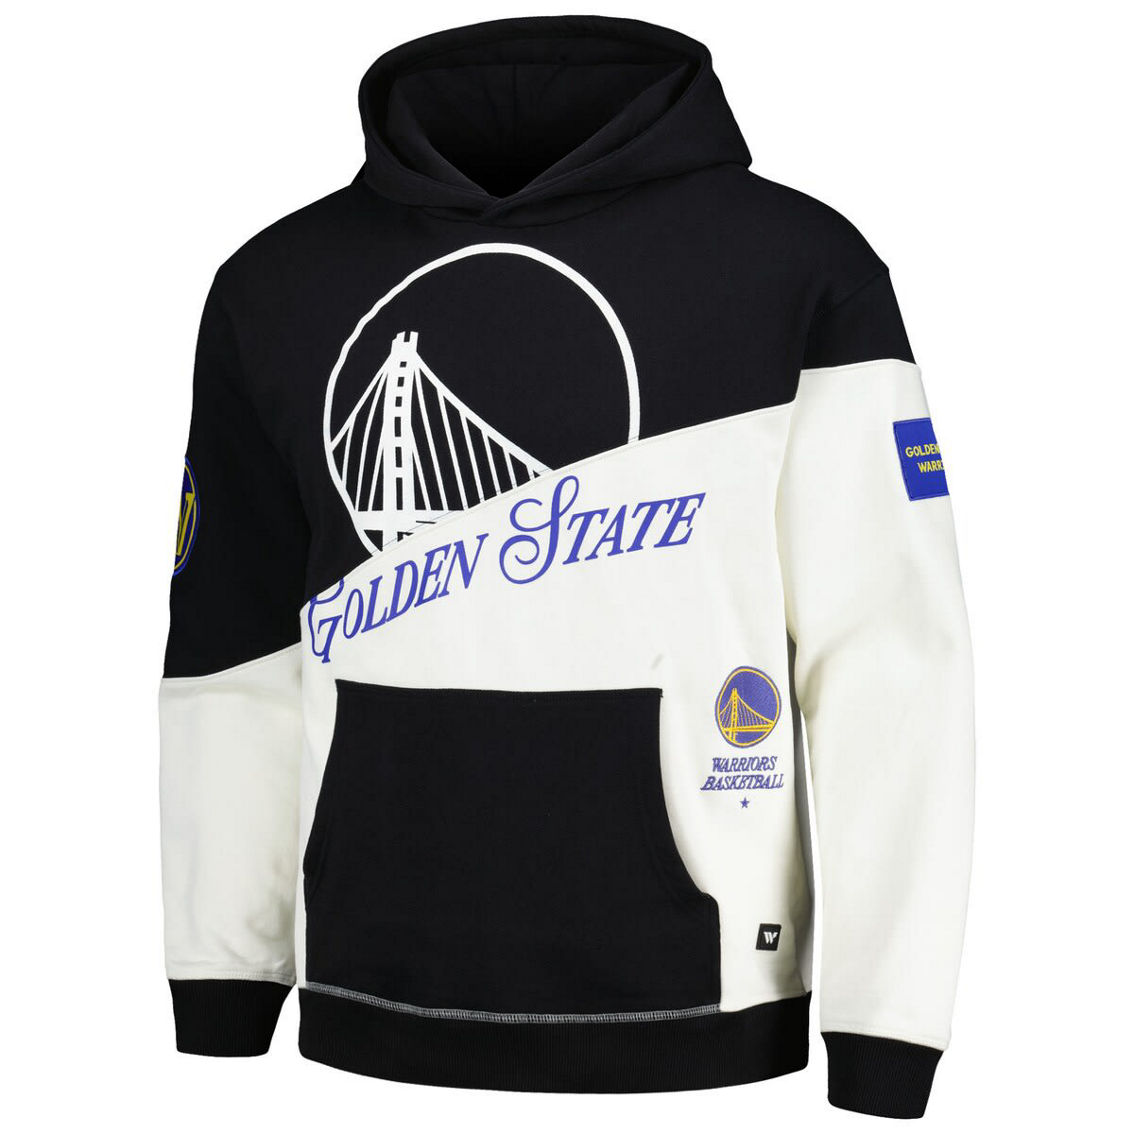 The Wild Collective Unisex Black Golden State Warriors Split Pullover Hoodie - Image 3 of 4